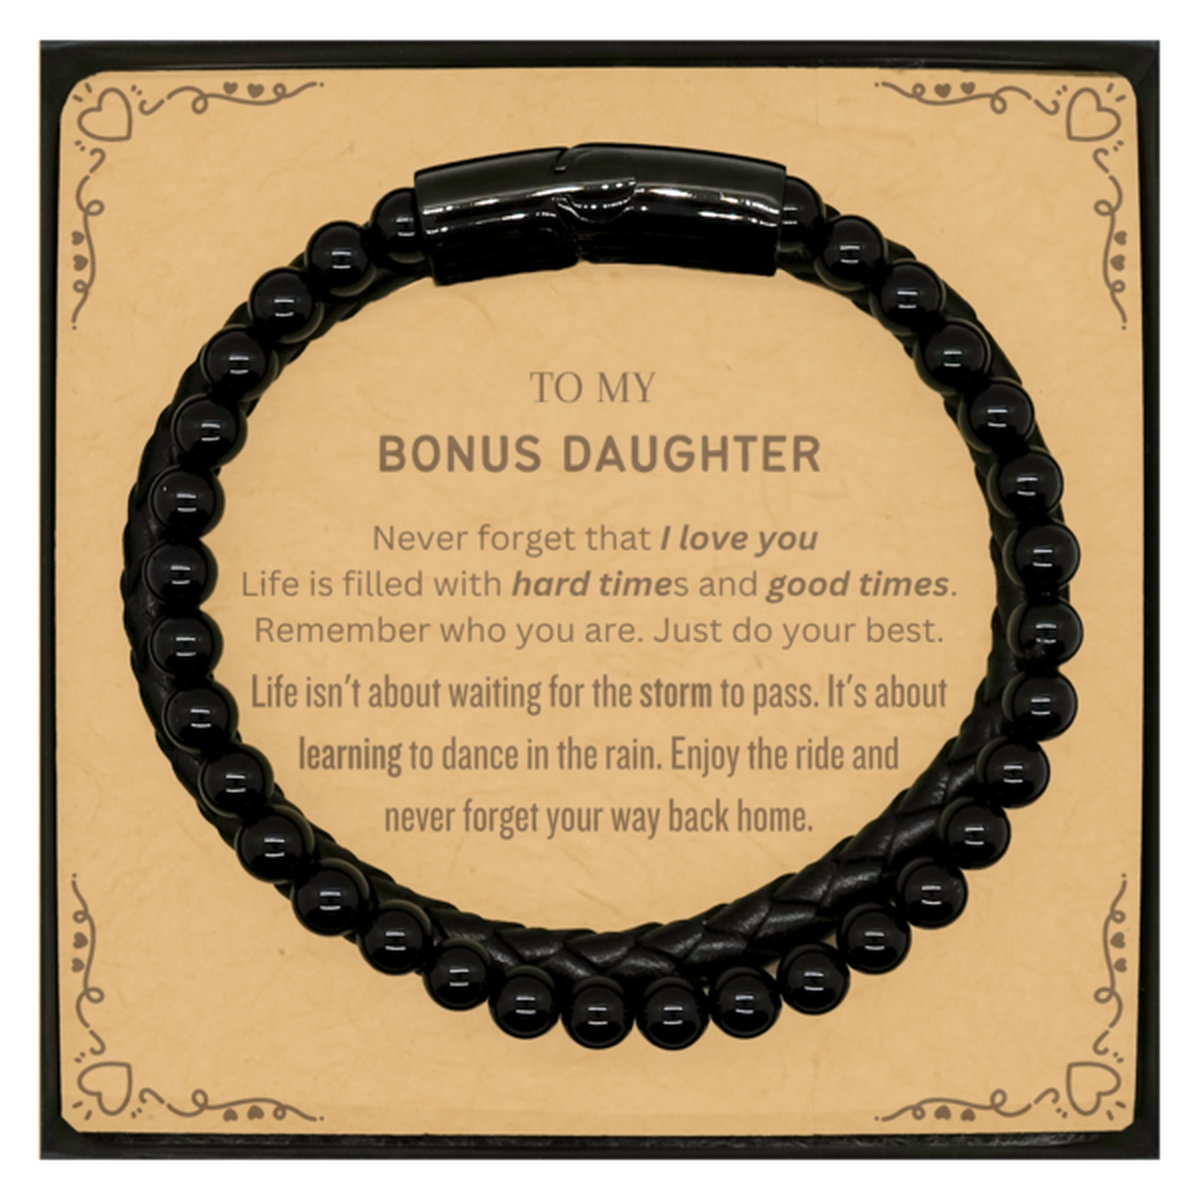 Christmas Bonus Daughter Stone Leather Bracelets Gifts, To My Bonus Daughter Birthday Thank You Gifts For Bonus Daughter, Graduation Unique Gifts For Bonus Daughter To My Bonus Daughter Never forget that I love you life is filled with hard times and good